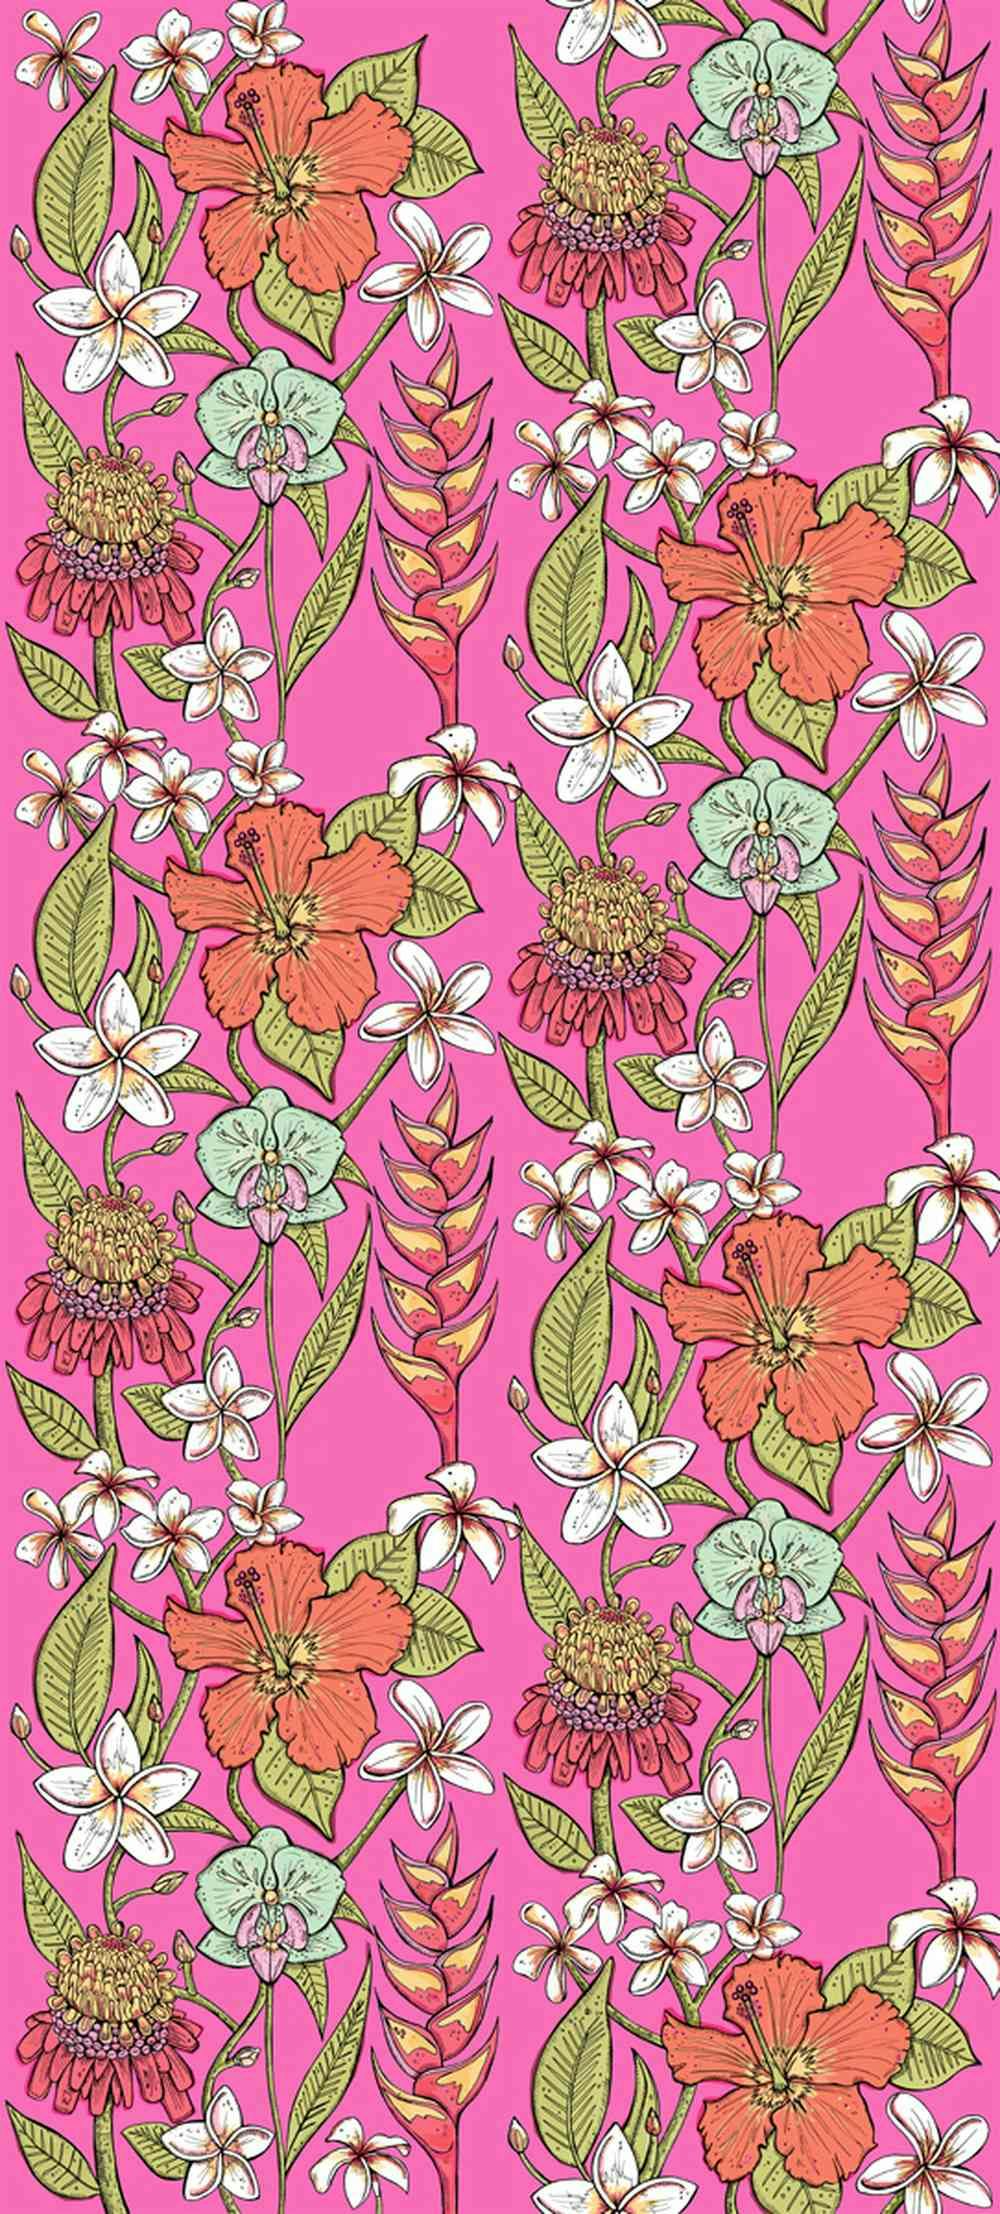 A repeat pattern digital illustration of flowers and leaves against a bright pink background. The flowers and leaves are different shades of pinks, creams, blues and greens.